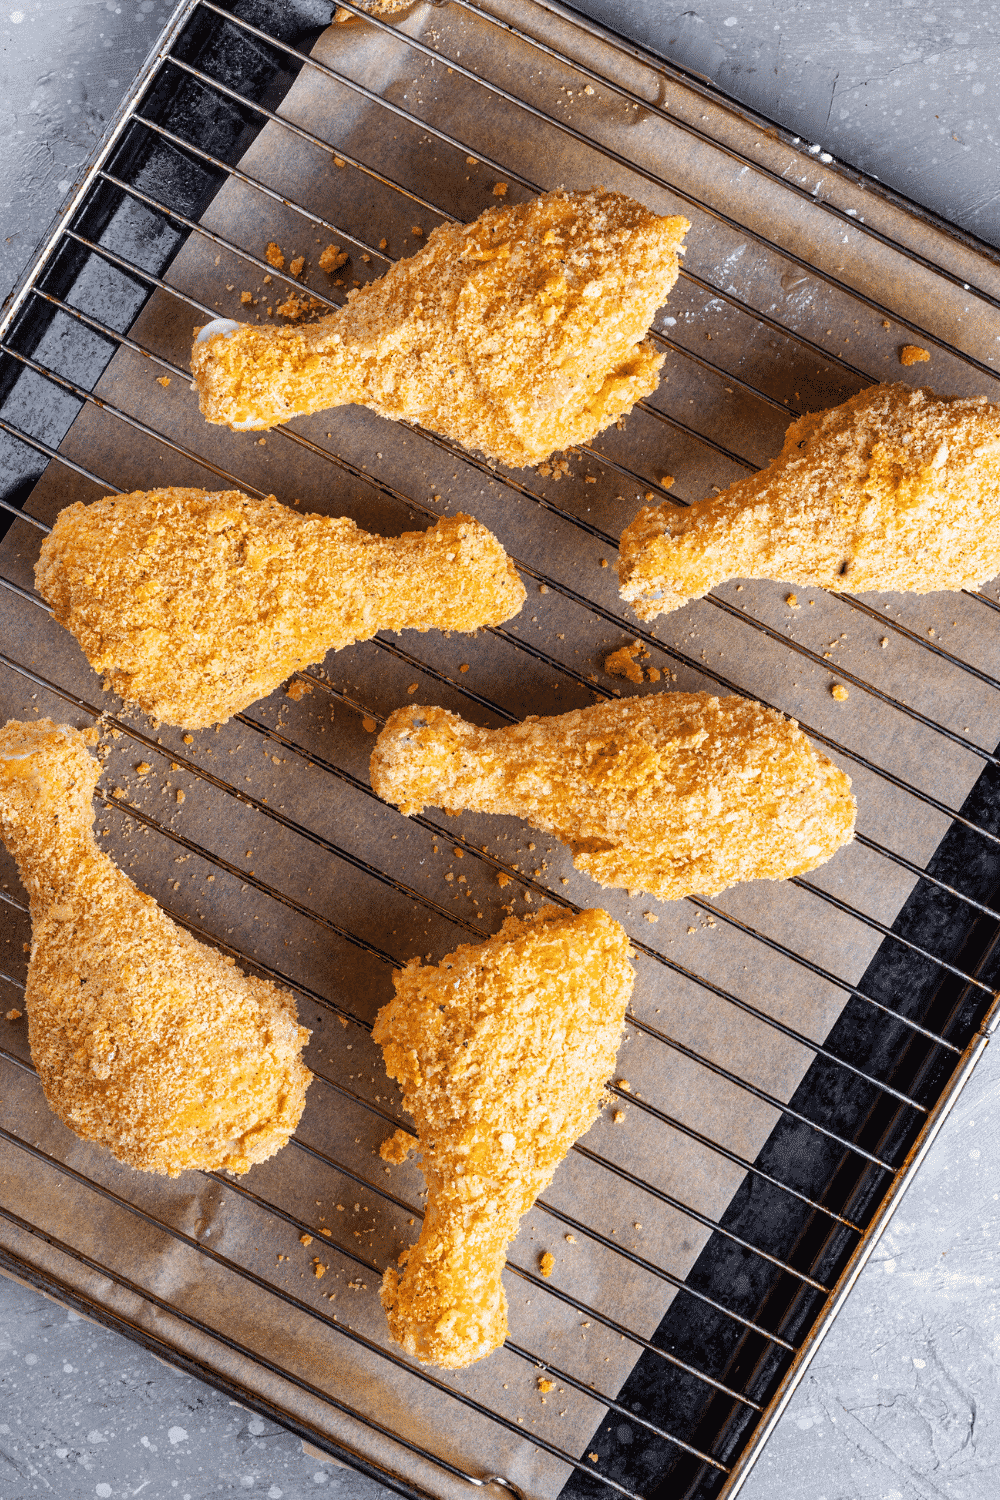 Six pieces of breaded fried chicken on a wire rack.